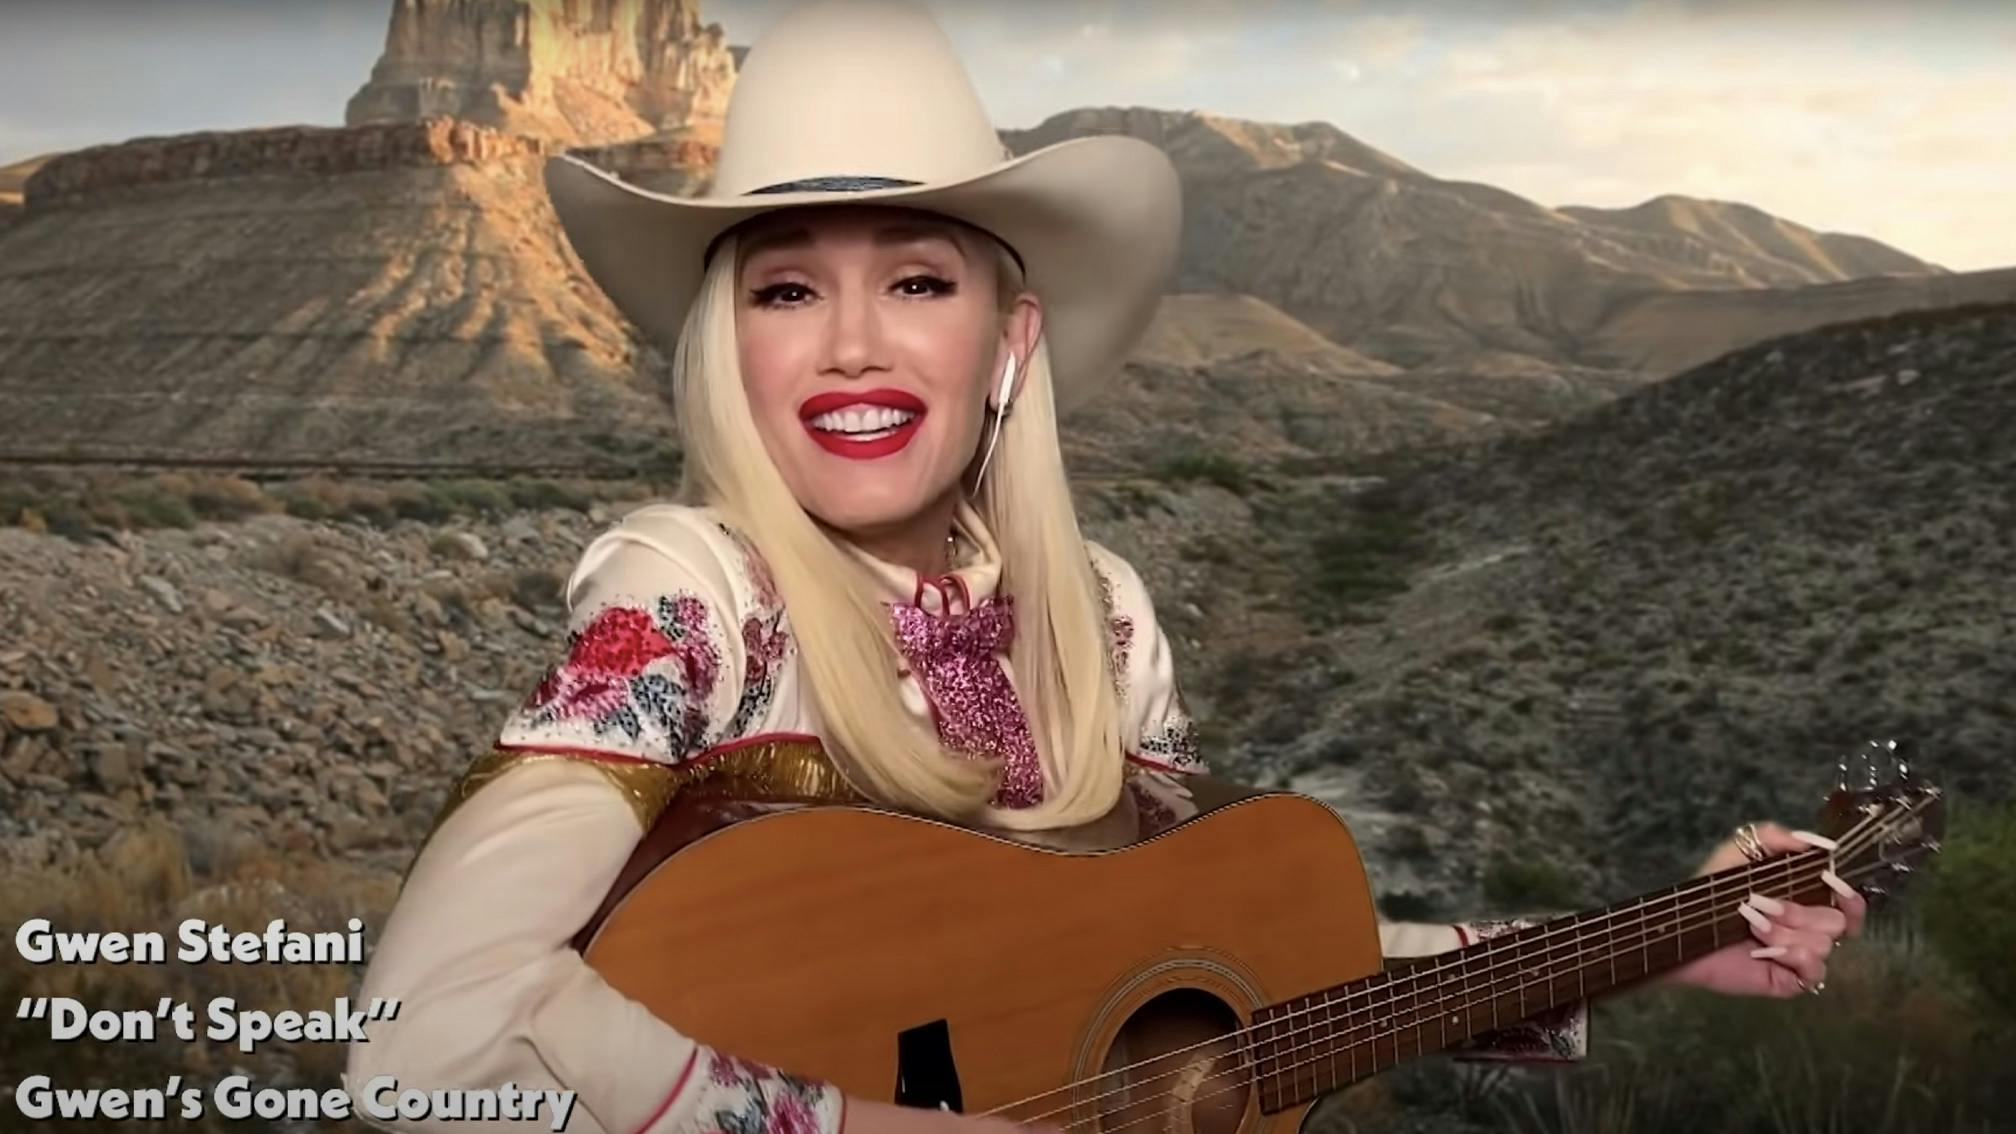 Watch Gwen Stefani put a country twist on these No Doubt hits